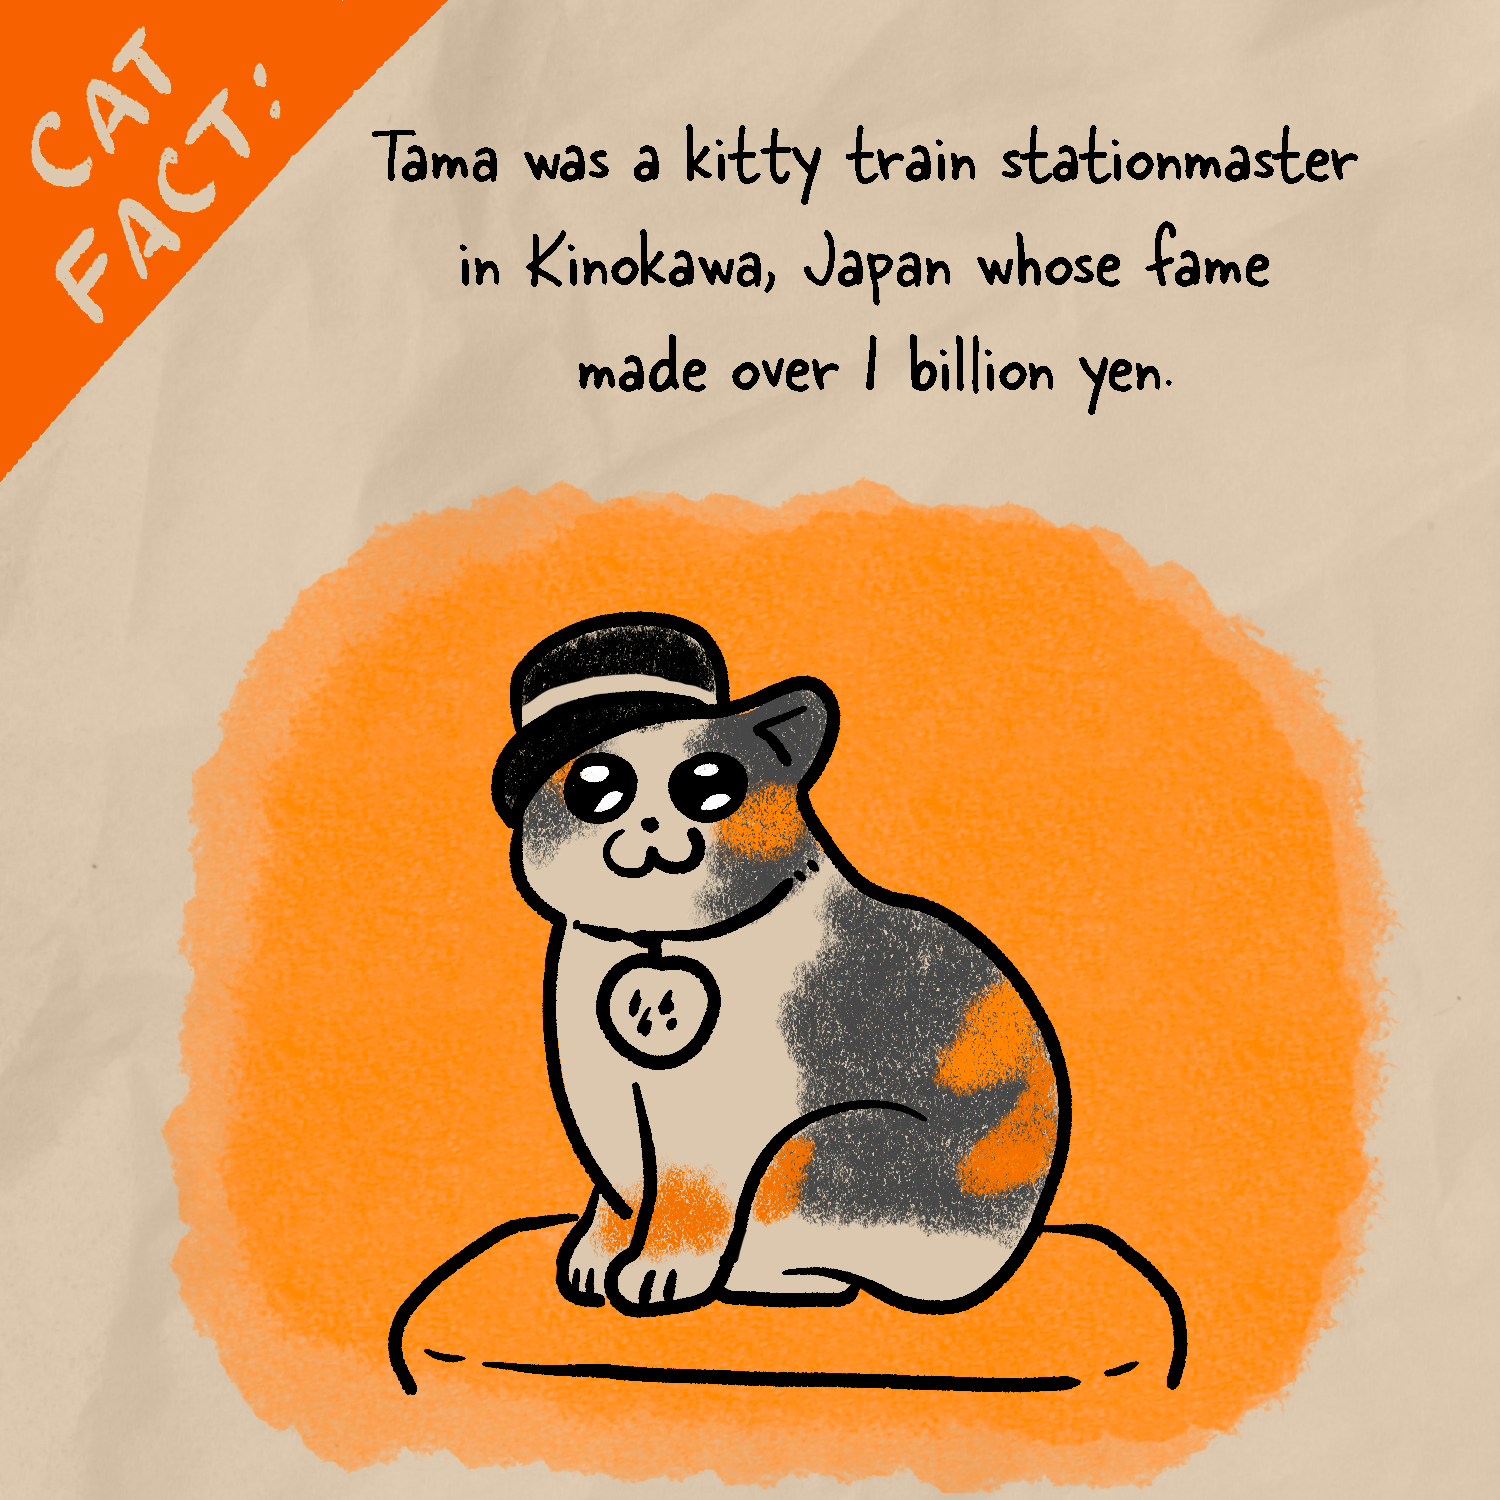 Cat Fact: Tama the Kitty Stationmaster